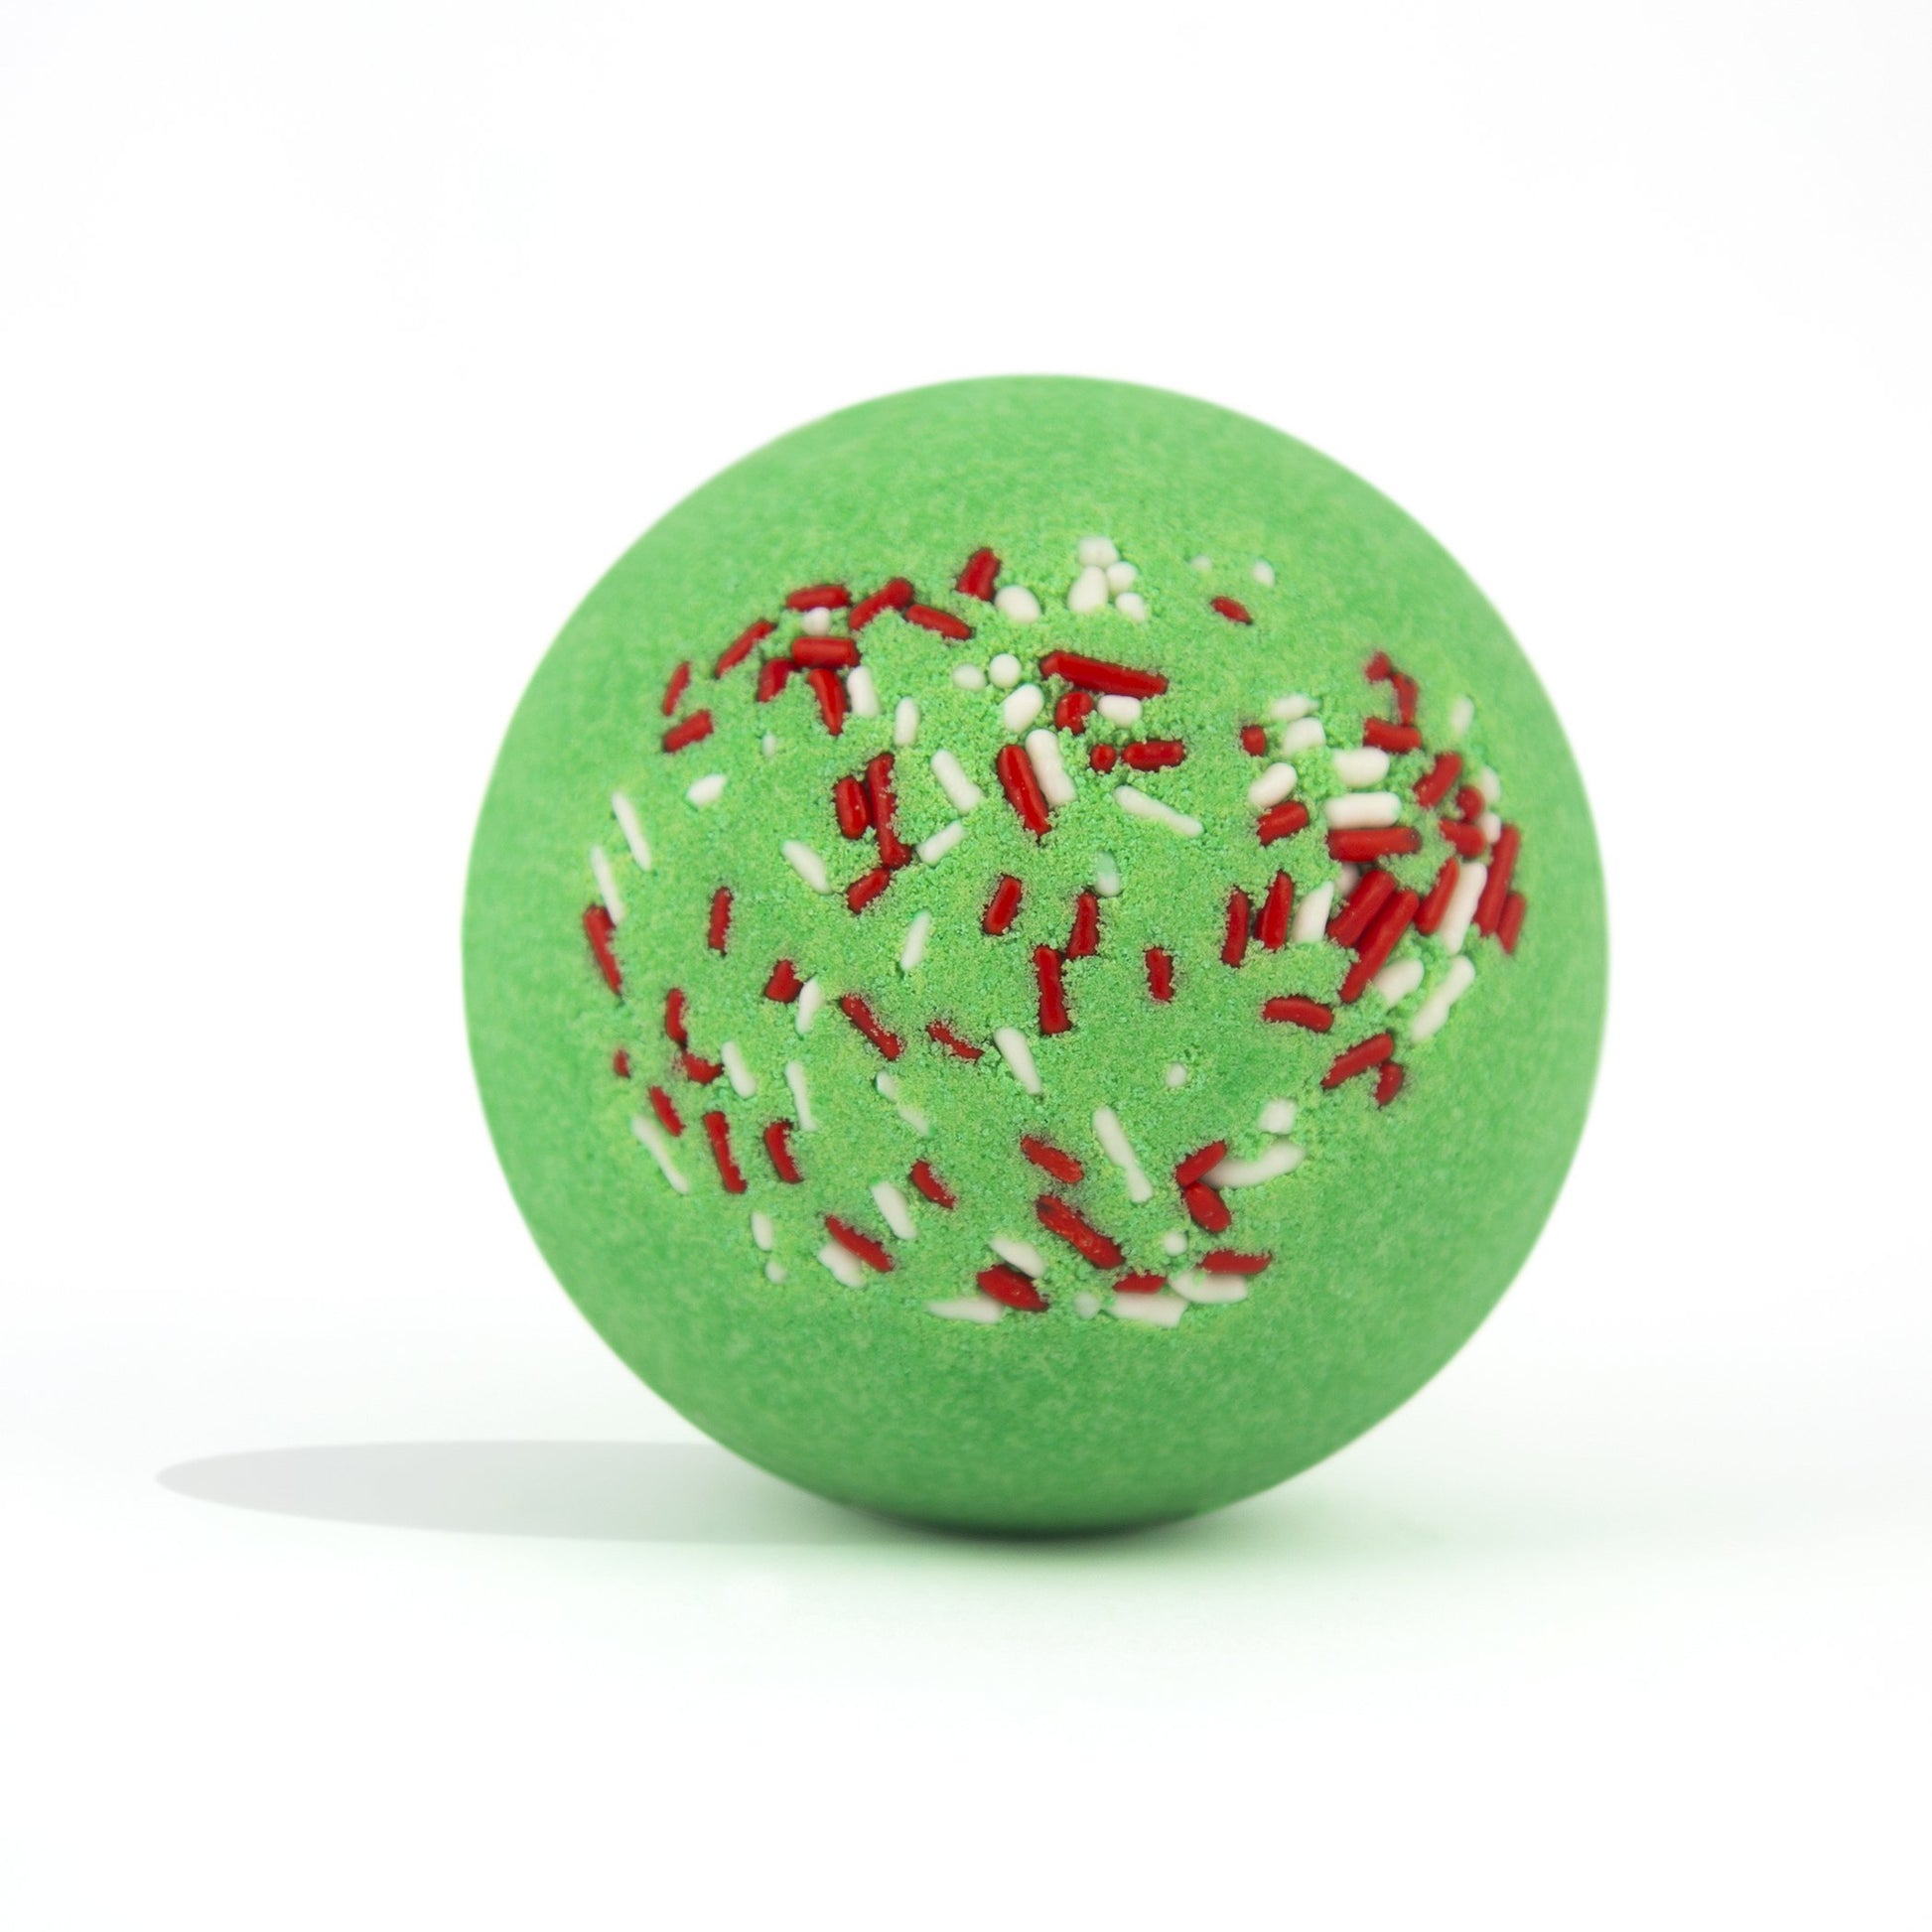 Green with red and white sprinkles, round bath bomb out of packaging on white background.